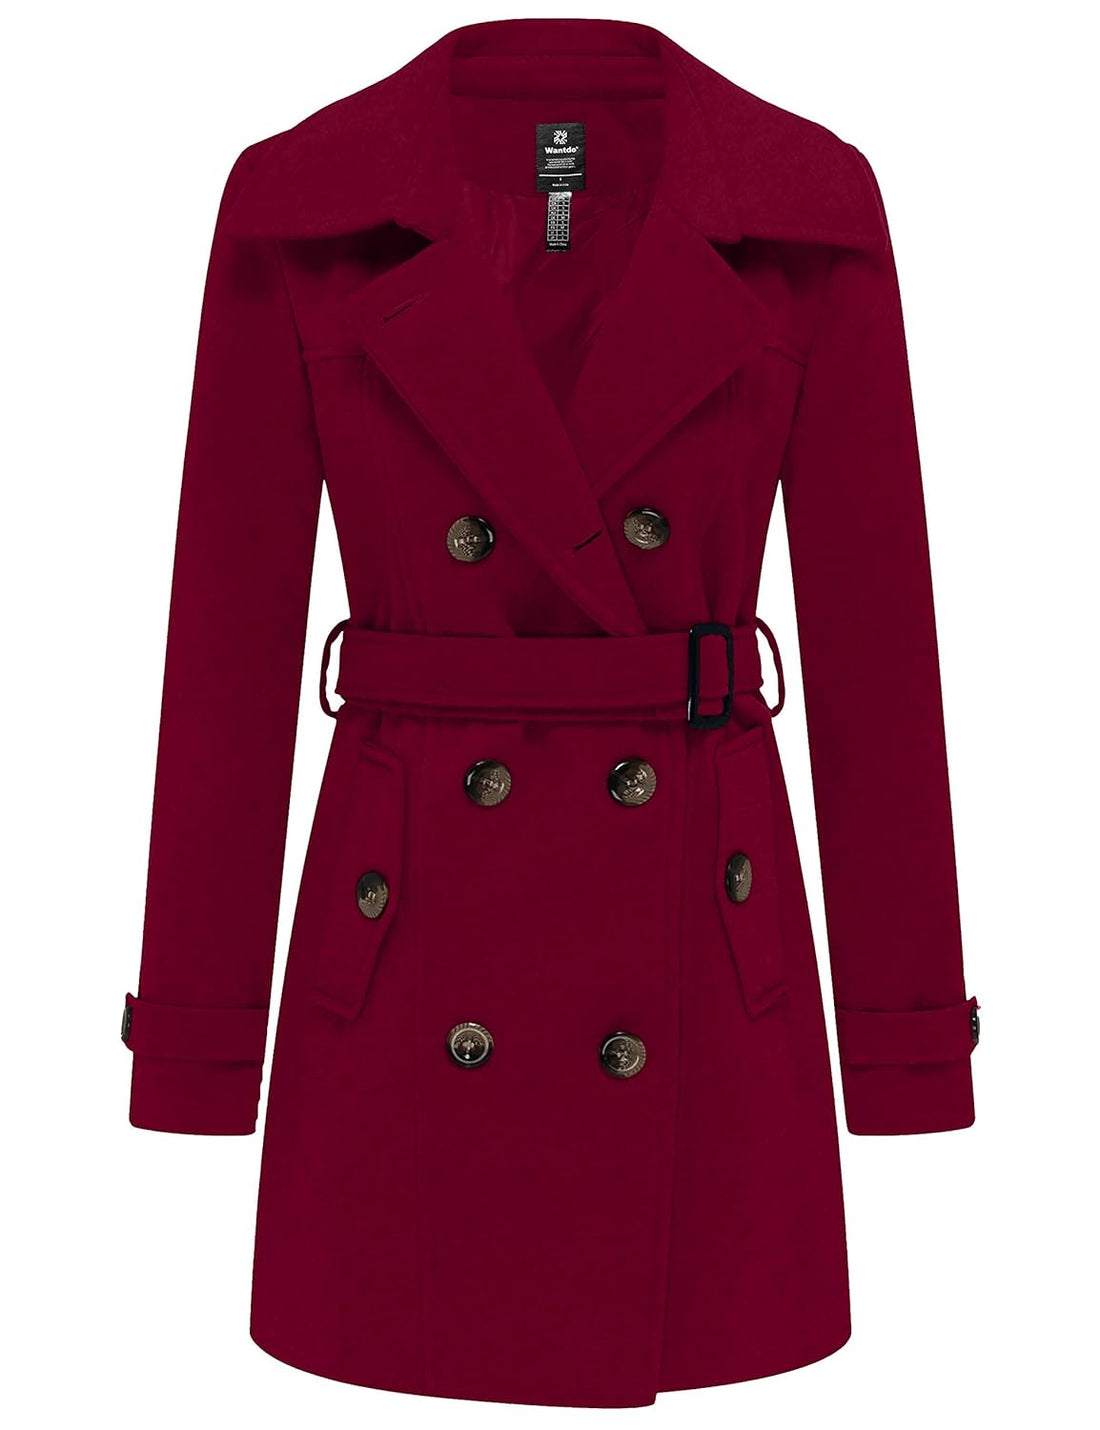 Wantdo Women's Spring Peacoat Double Breasted Pea Coat with Belt Wine L